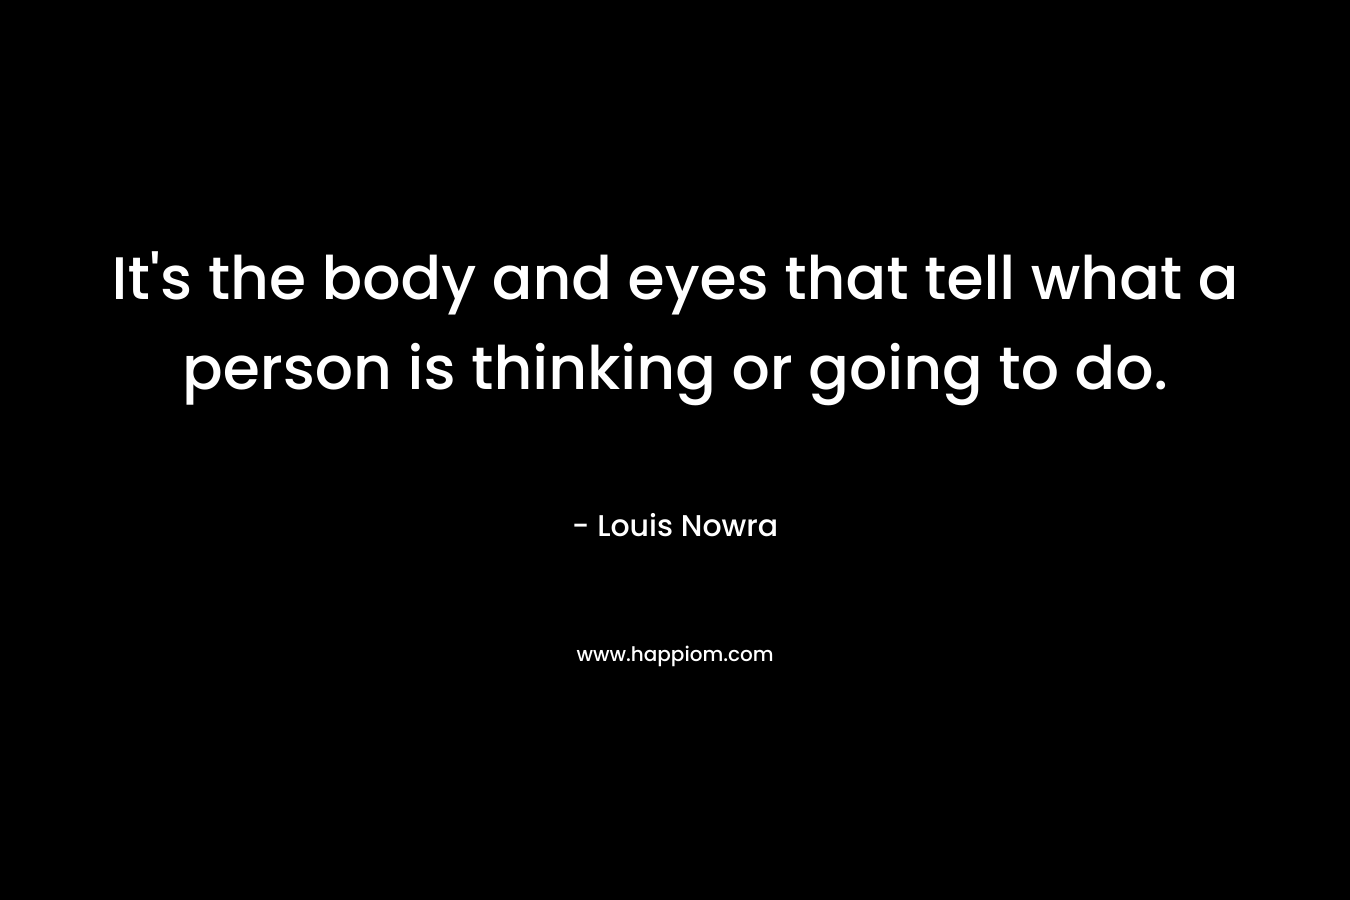 It’s the body and eyes that tell what a person is thinking or going to do. – Louis Nowra